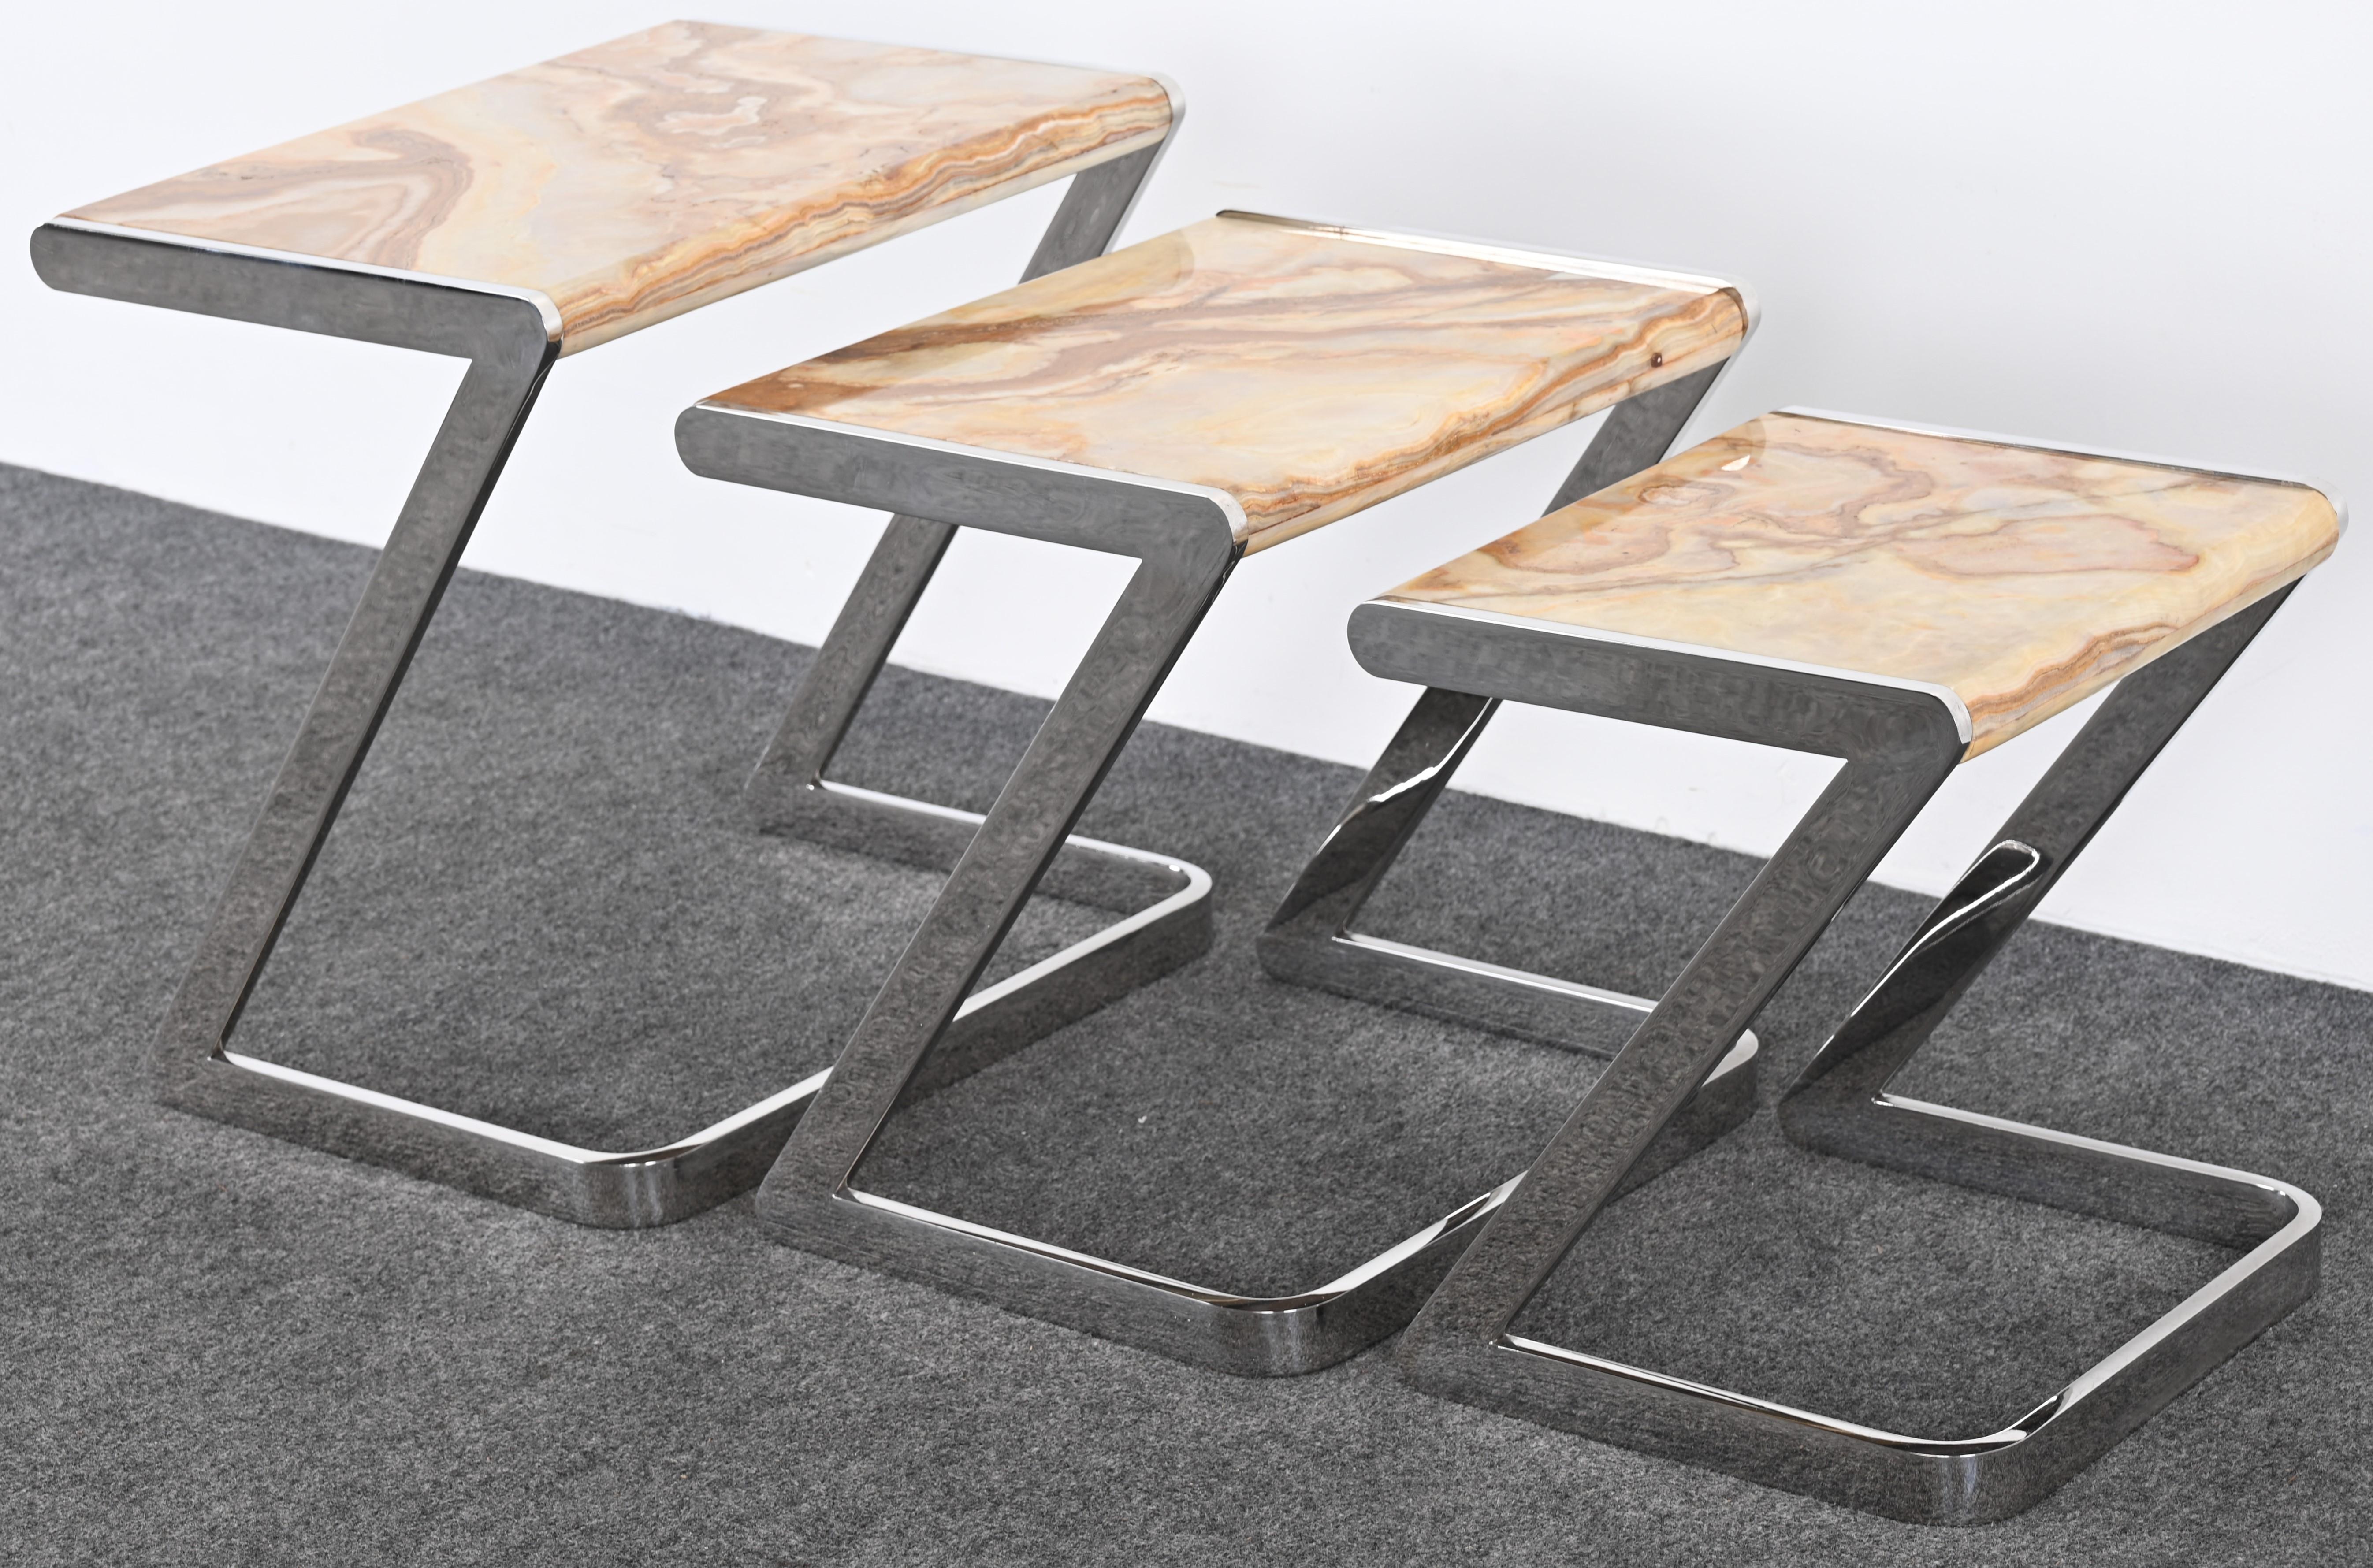 Onyx and Stainless Steel Nesting Tables by Brueton, 1980s For Sale 13